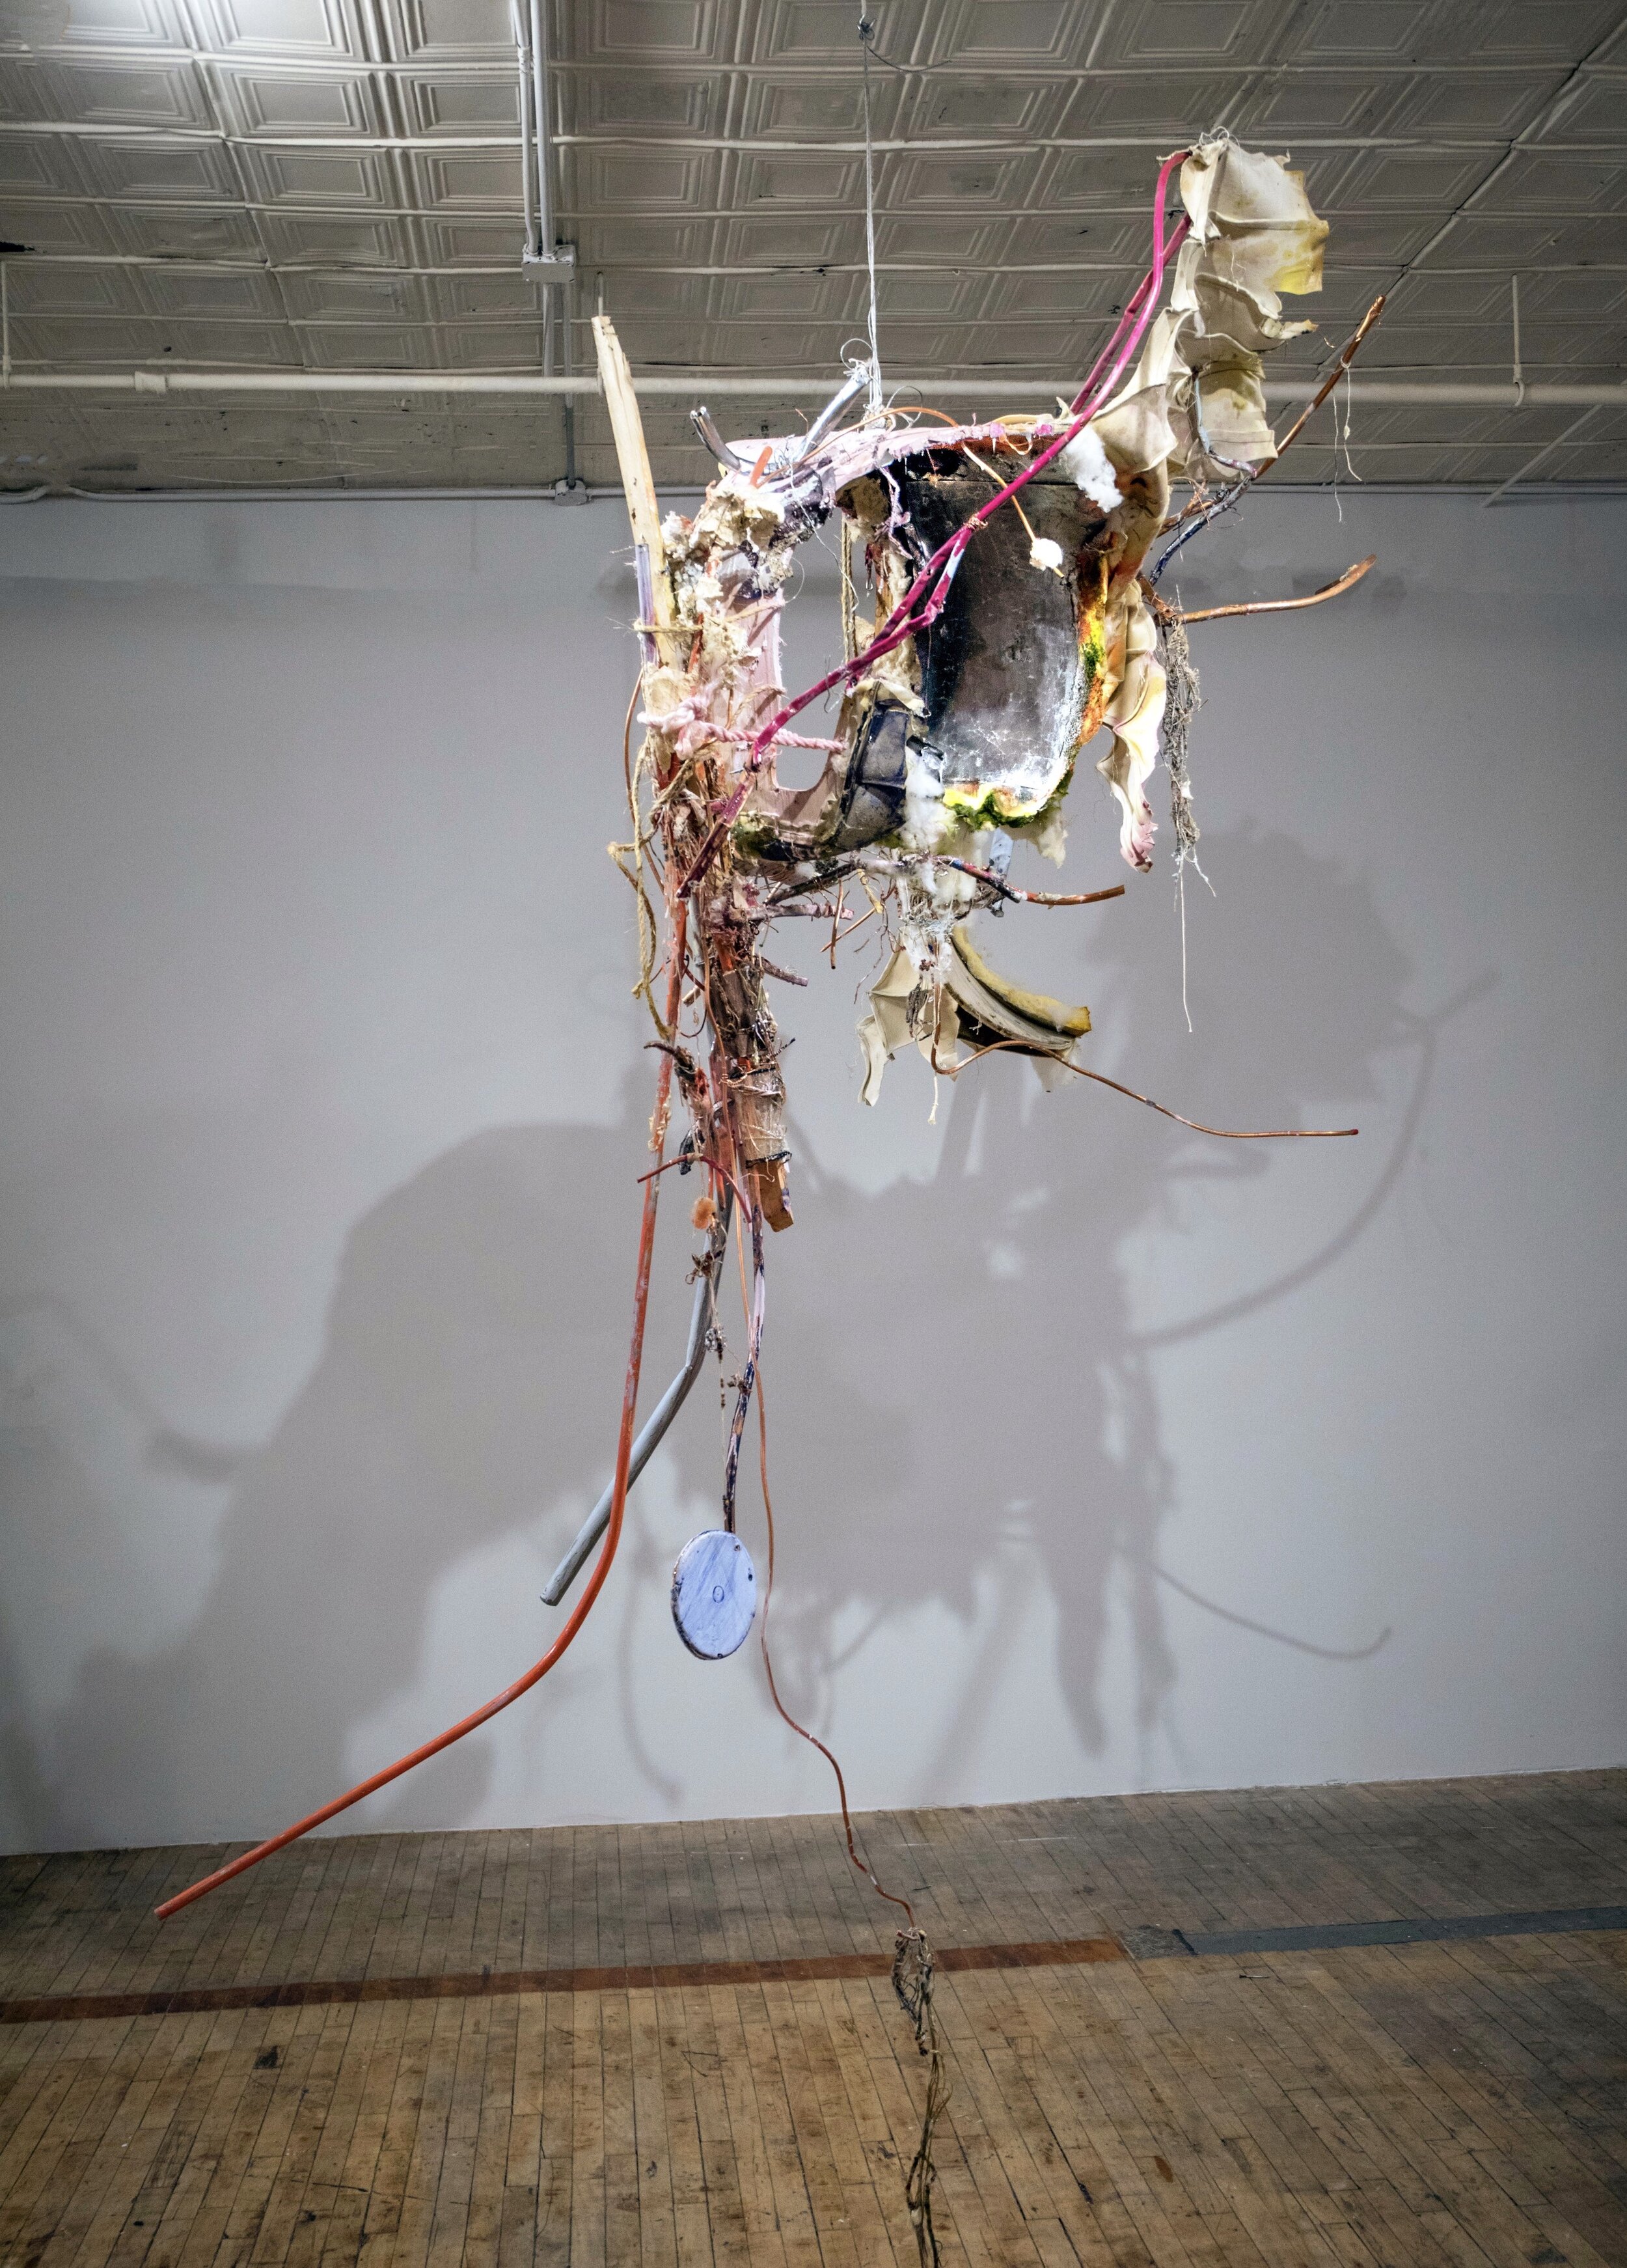 Daniel John Gadd,  A Place for You , 2019, wood, plaster, epoxy resin, copper, glass, rope, oil paint, synthetic leather, and fibers, 115 x 100 x 75 in.